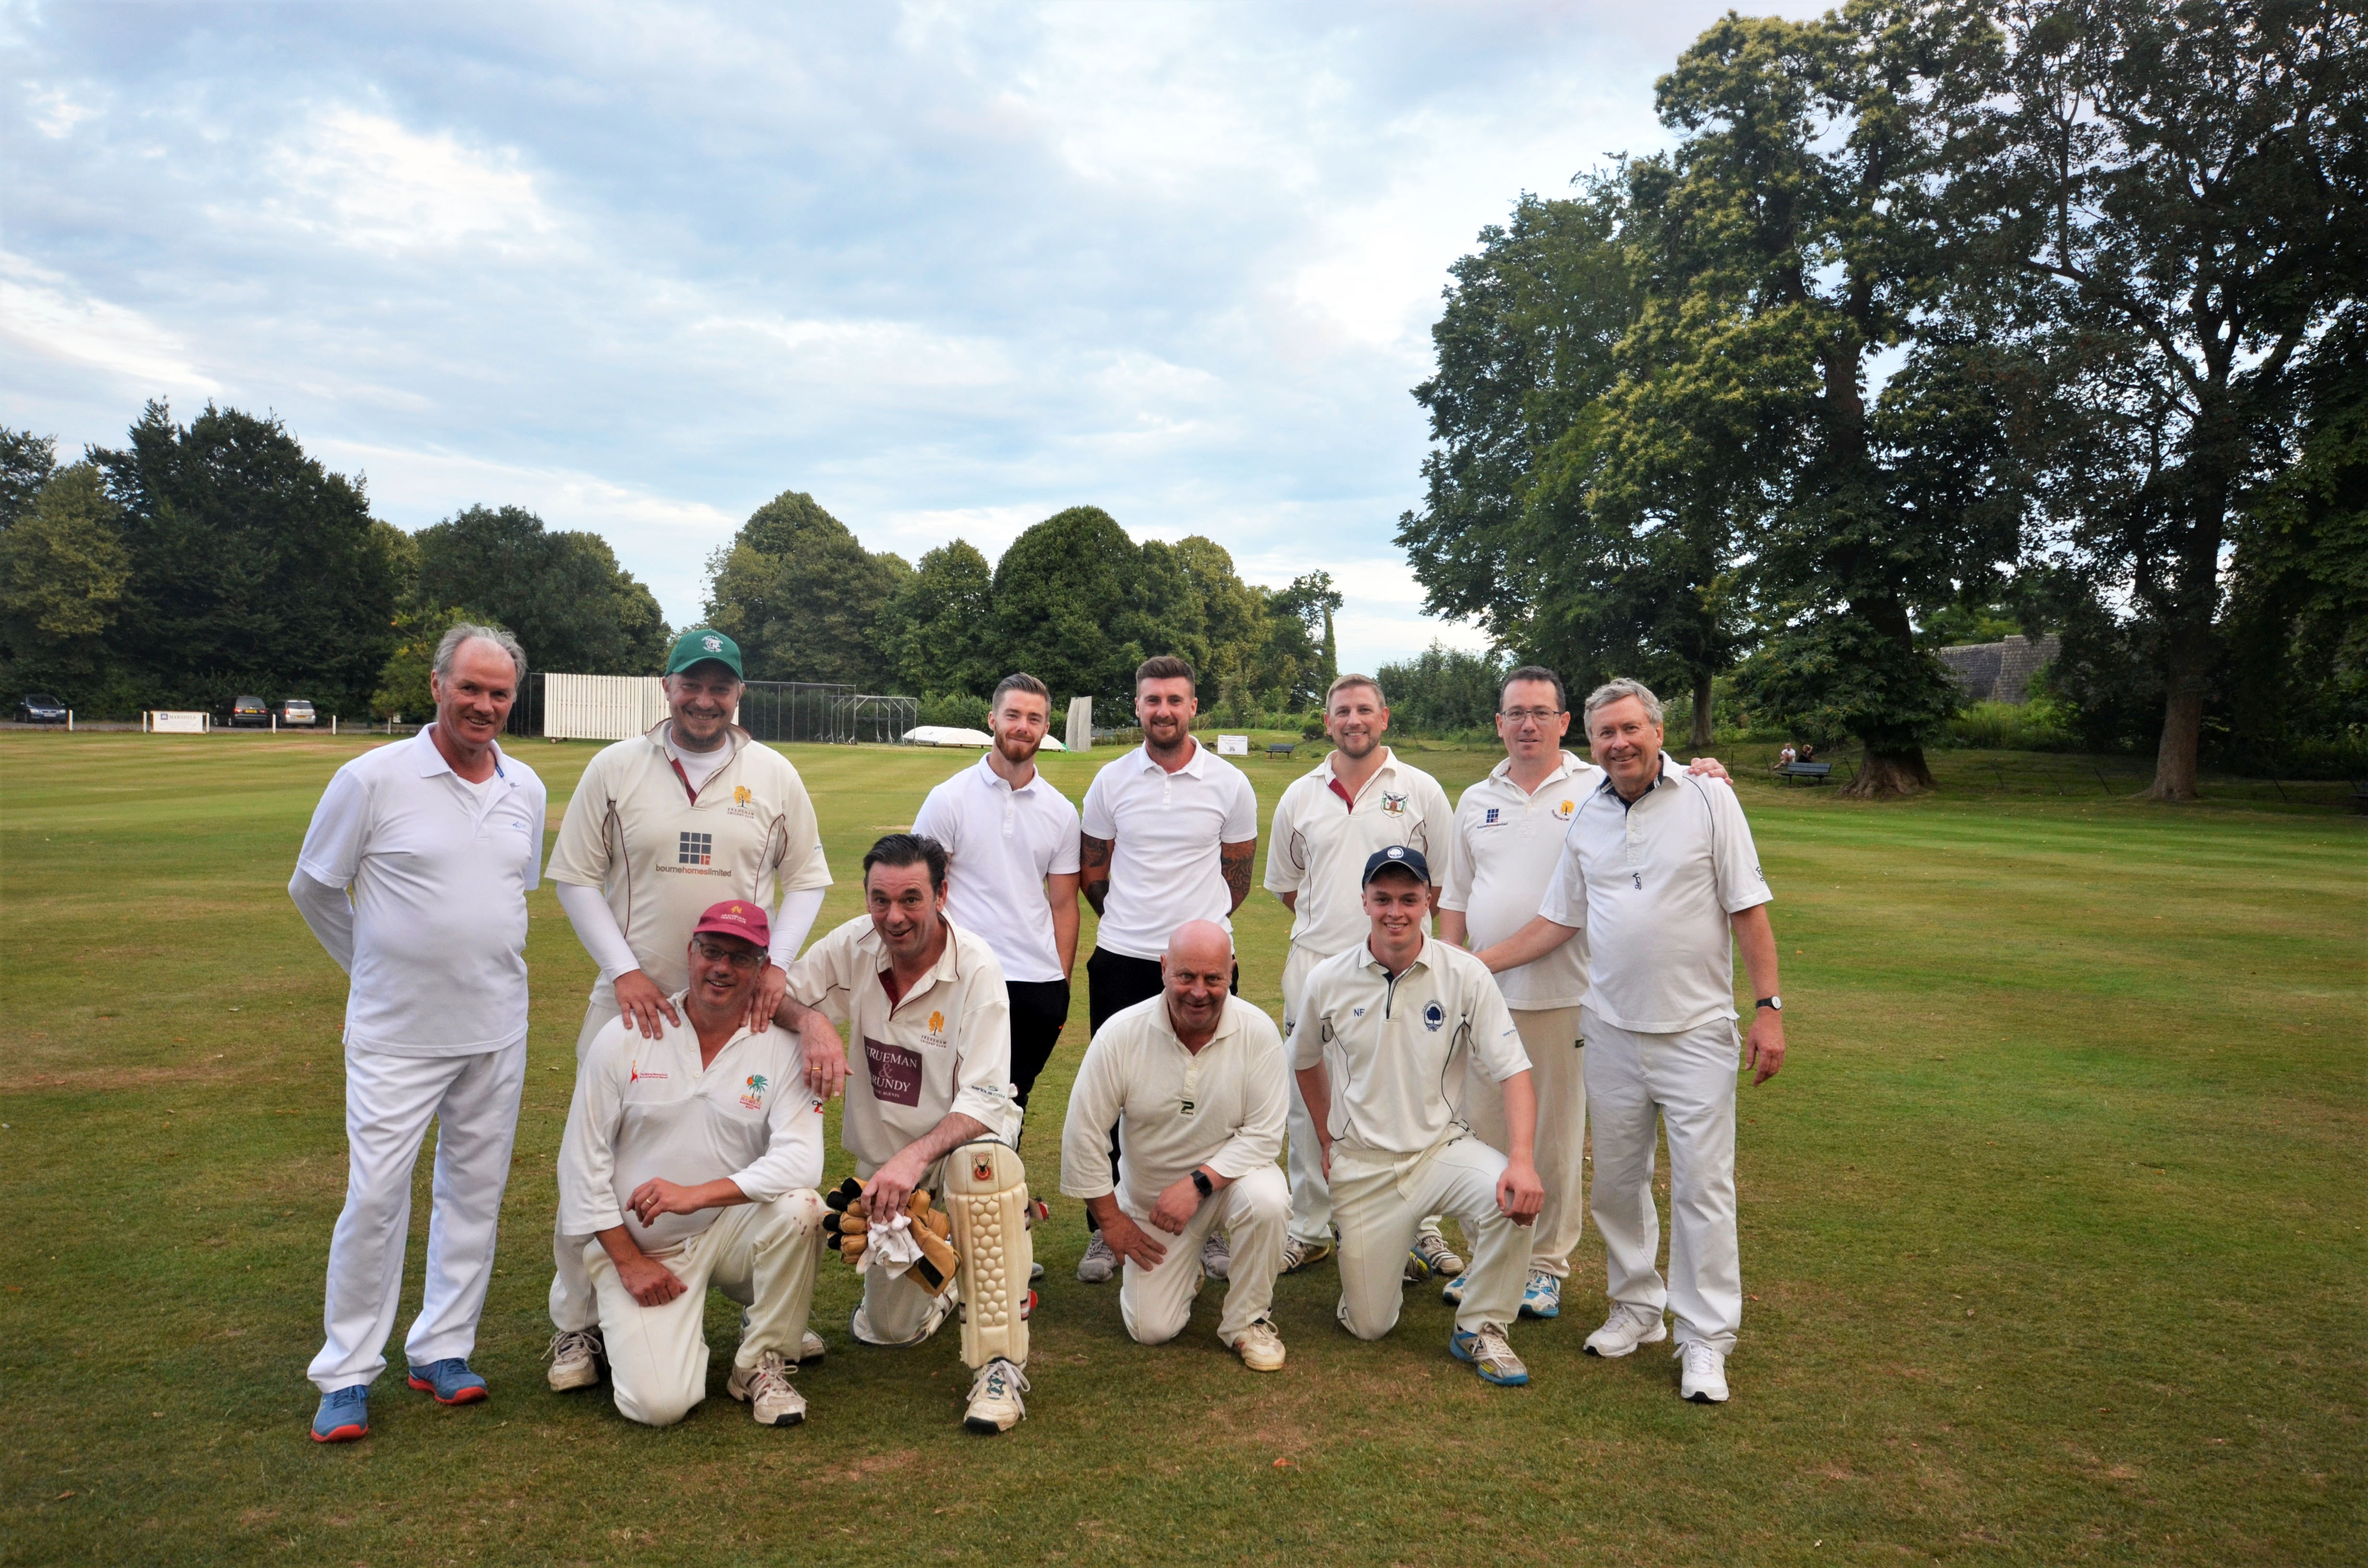 Andrew Lodge Celebrate At Annual Cricket Match